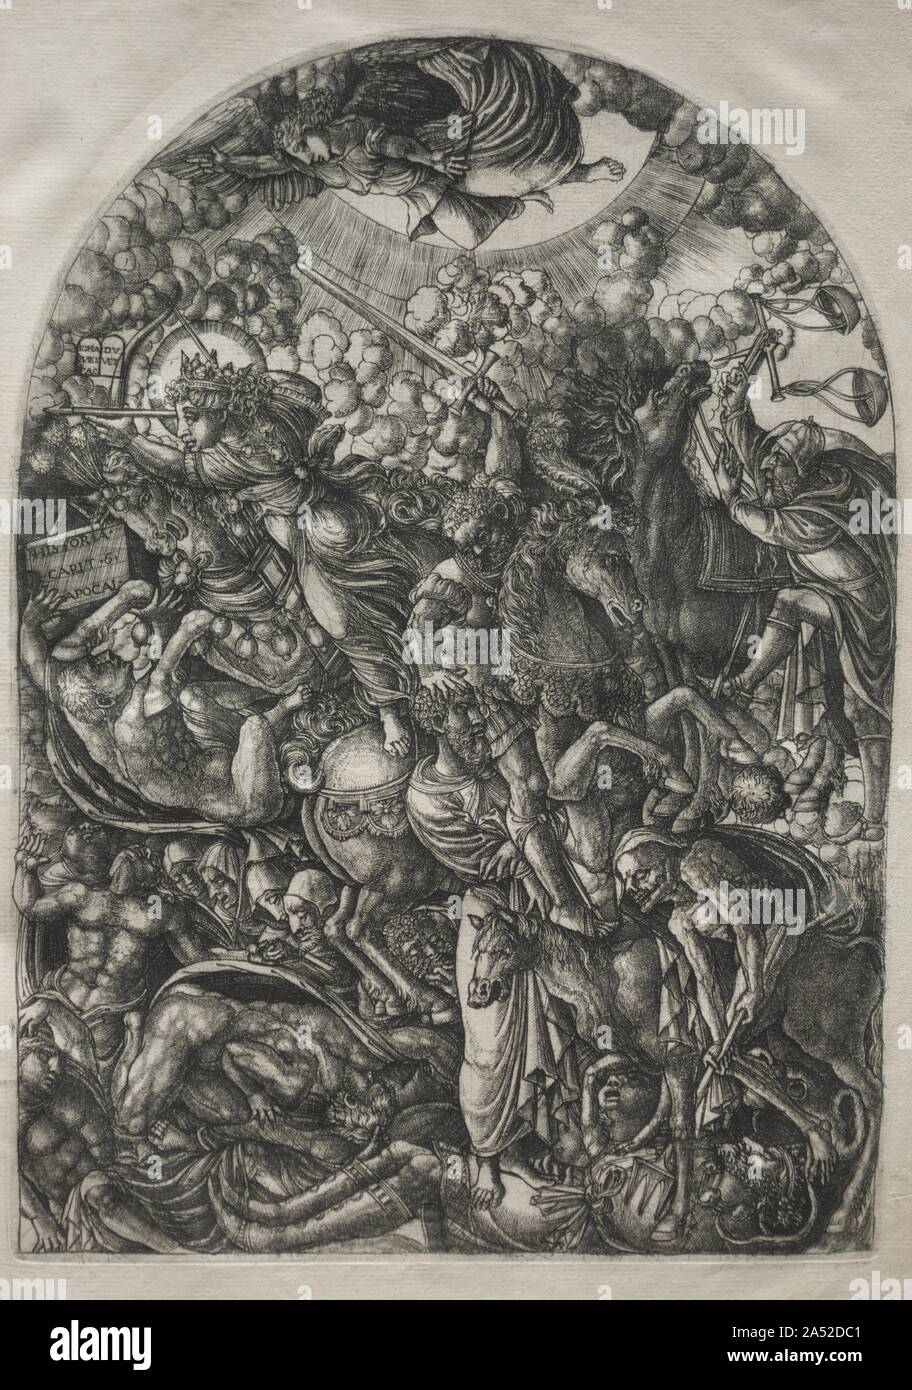 The Apocalypse: St. John Sees the Four Riders, 1546-1556. This print is part of a bound volume of works illustrating the a narrative of the Apocalypse, taken from the Revelation of Saint John in the Bible. The 23 engravings in the series occupied the artist for a number of years and represent his greatest artistic achievement. The museum's volume is one of only seven known complete sets. Jean Duvet was one of the first major printmakers in France and one of the most original artists of the 1500s. Although he worked mostly in the provincial city of Langres, he became aware of Italian art throug Stock Photo